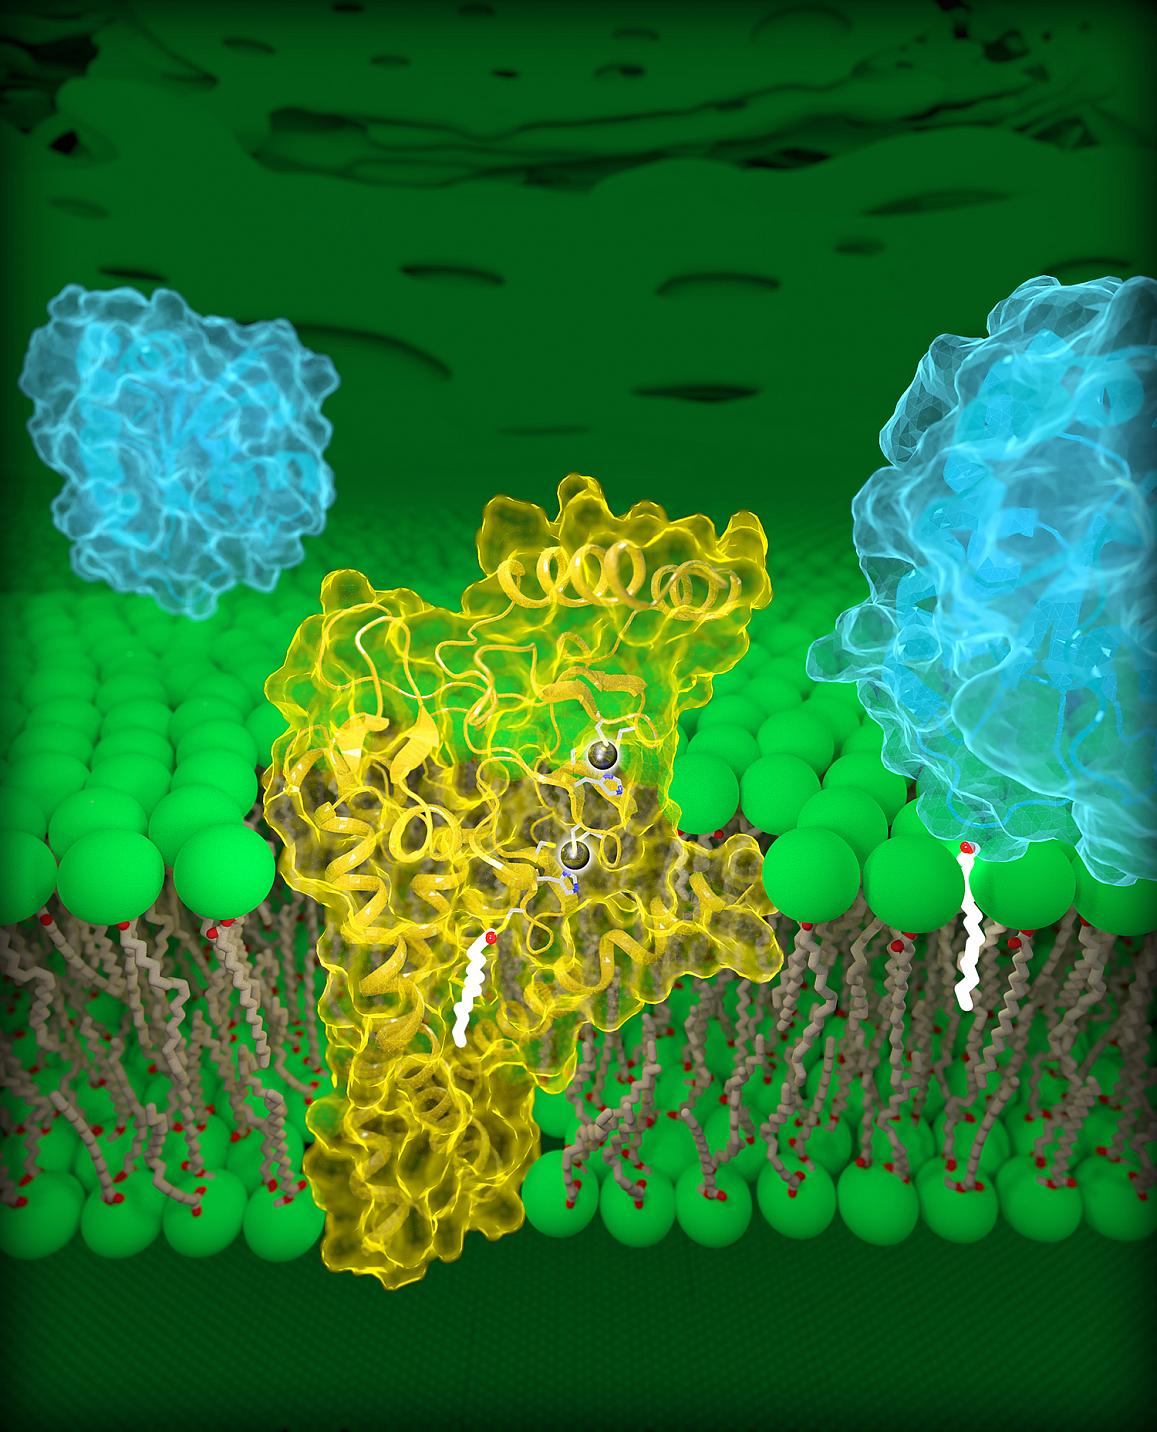 NIH Researchers Report First 3D Structure of DHHC Enzymes - Global ...